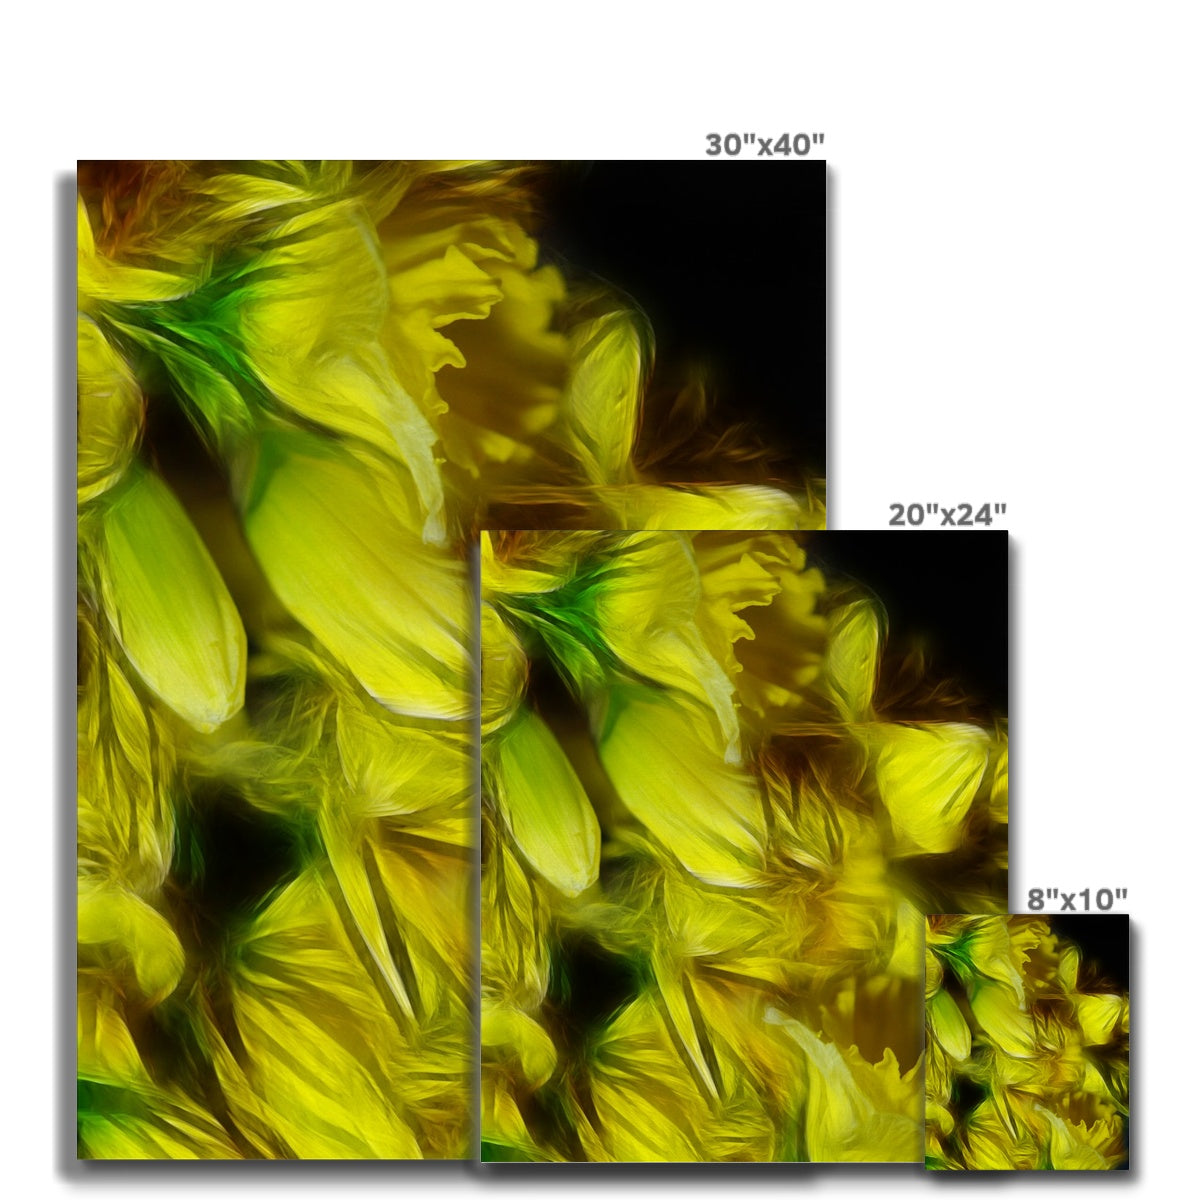 Abstract Yellow Daffodils Canvas